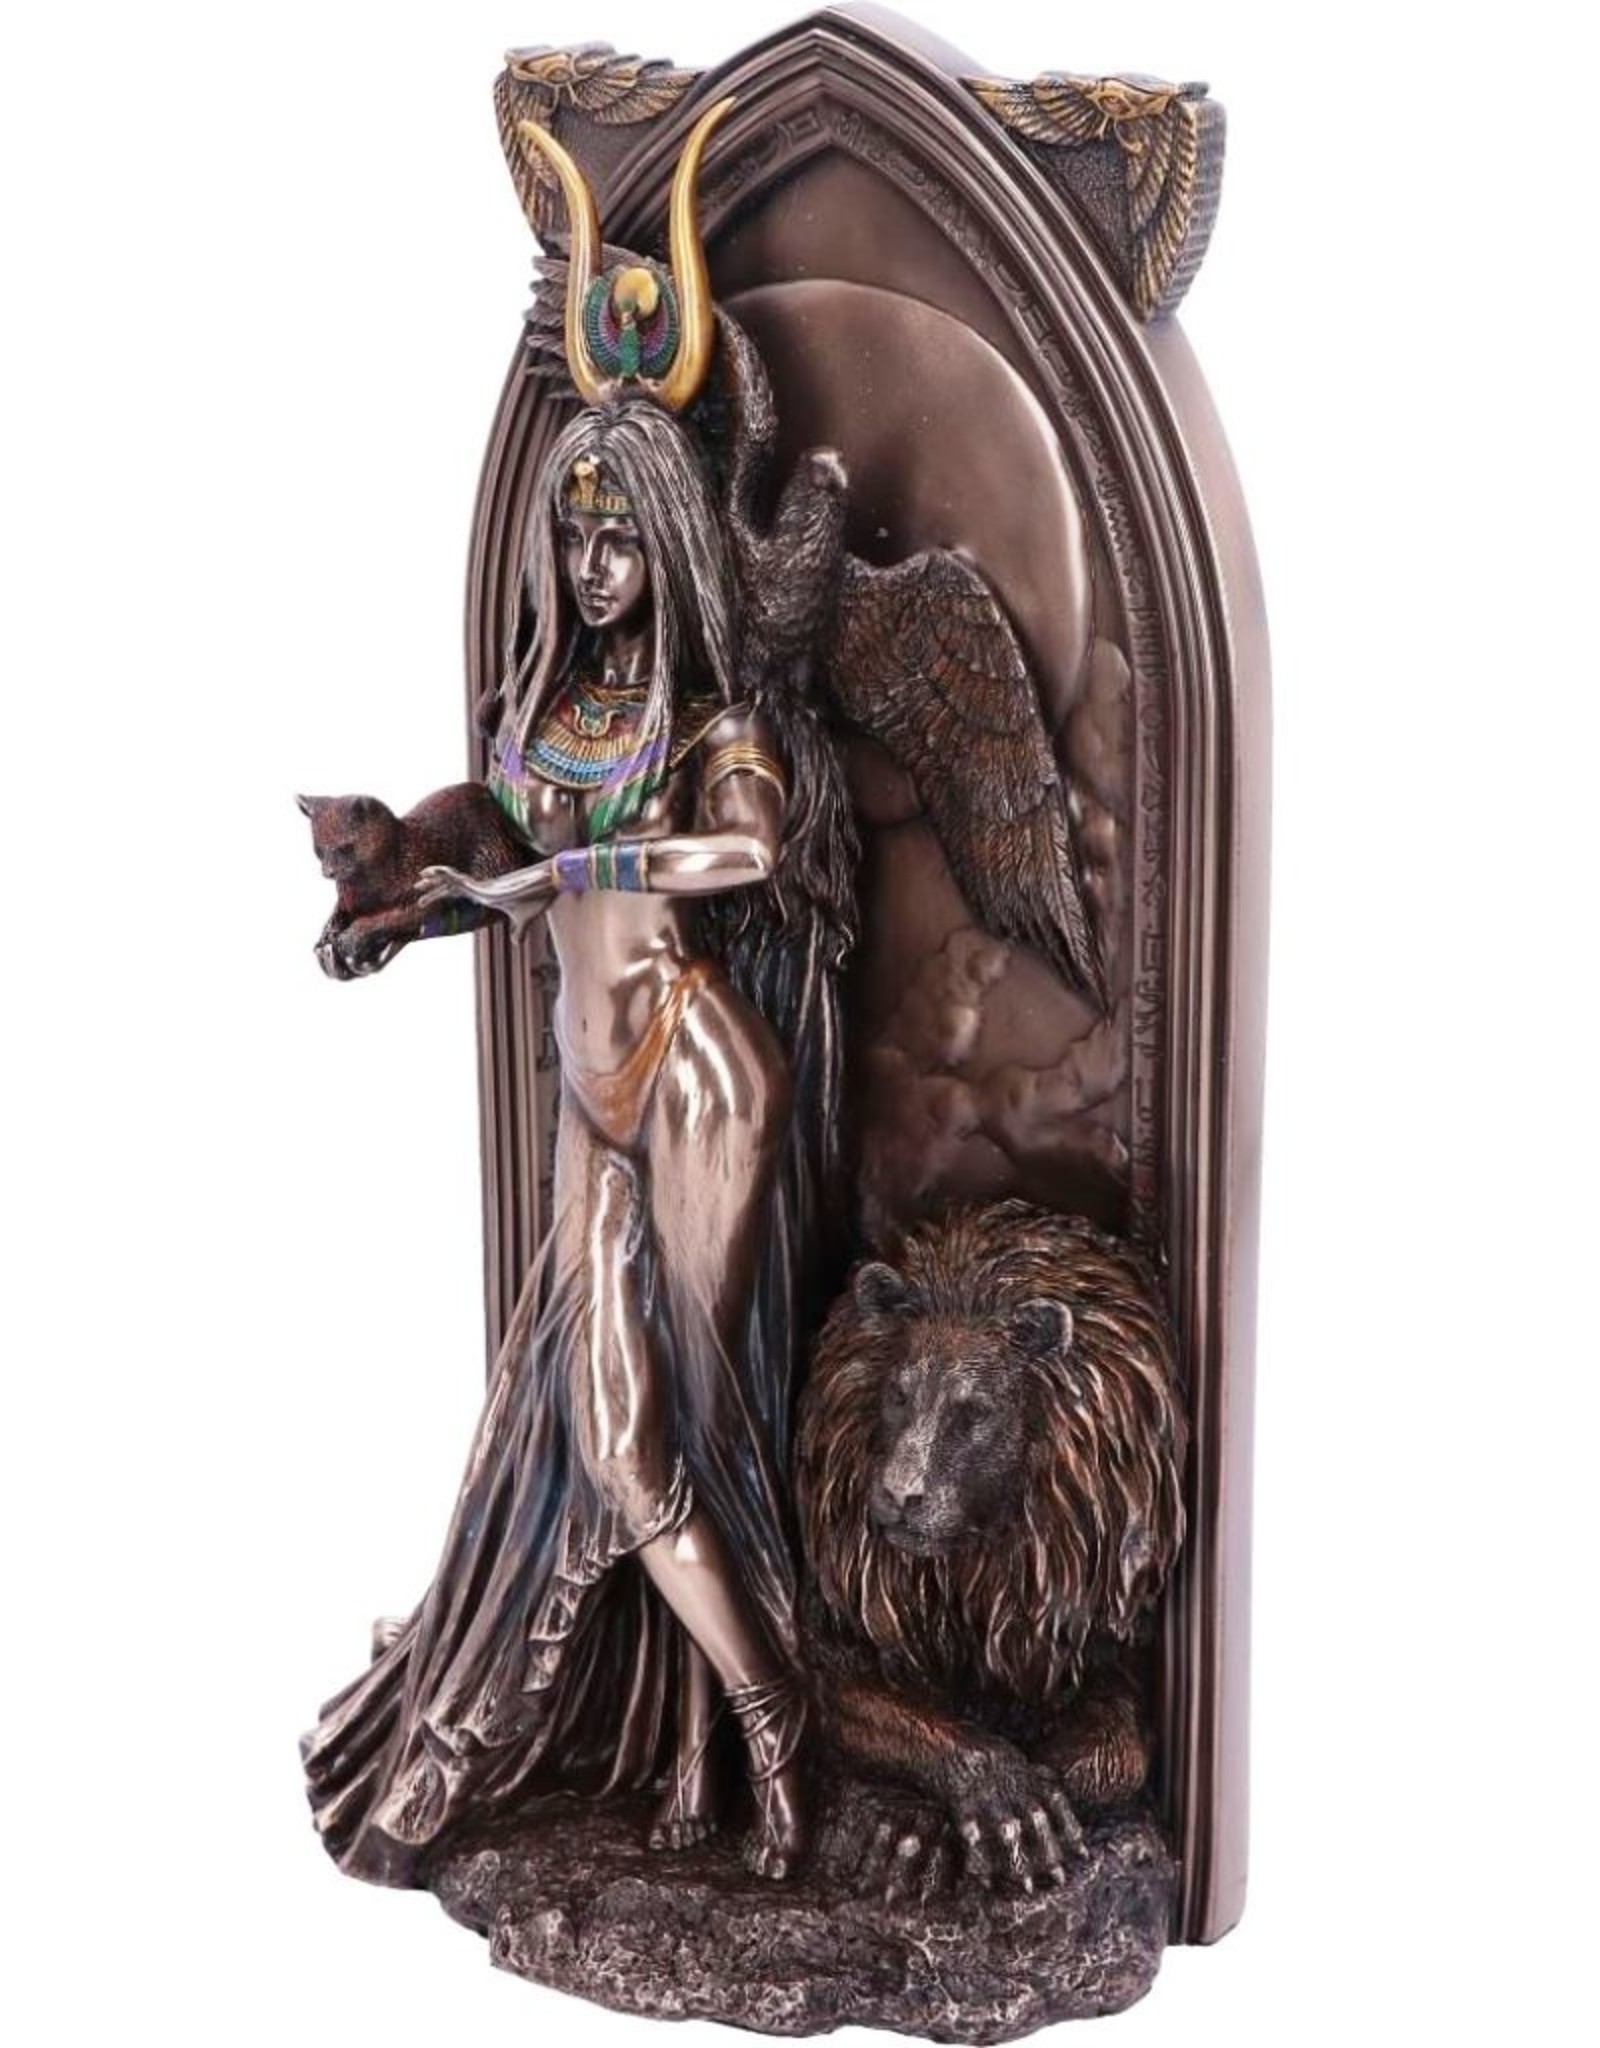 Veronese Design Giftware Figurines Collectables - The Priestess Bronzed Statue Ruth Thompson 27cm